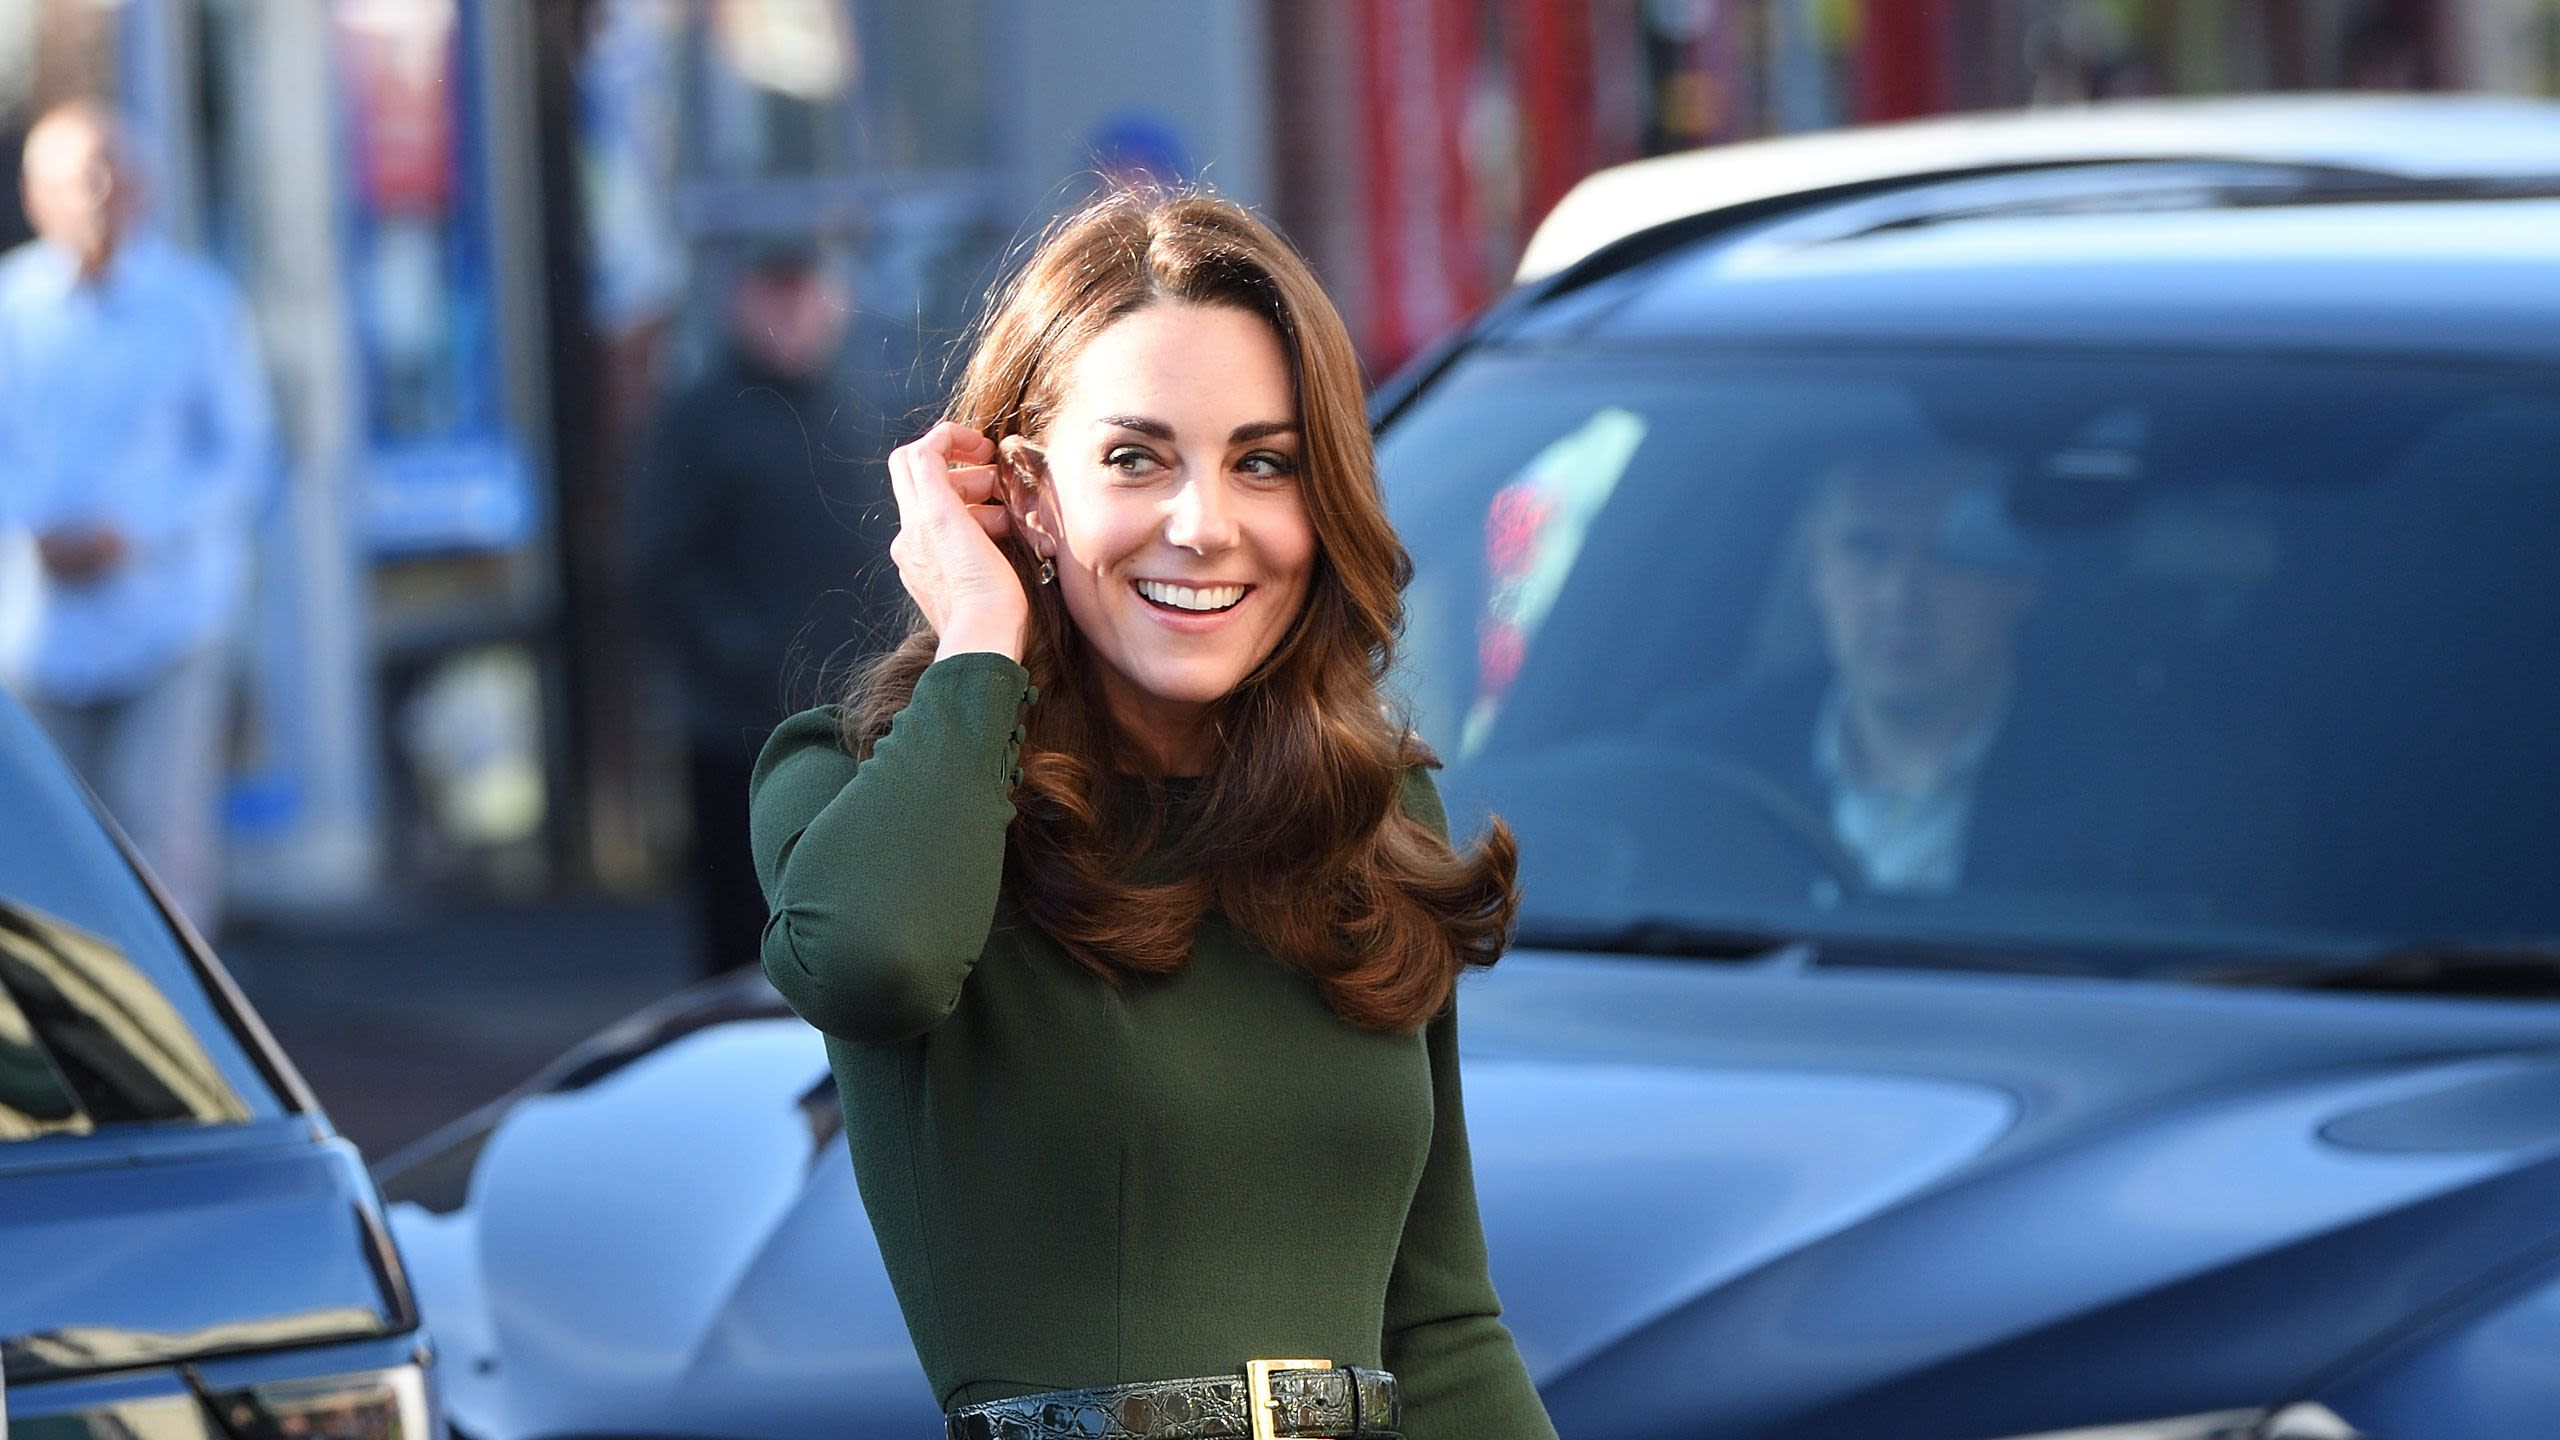 Princess Kate Has Been Spotted in Public for the First Time Since Her Cancer Announcement